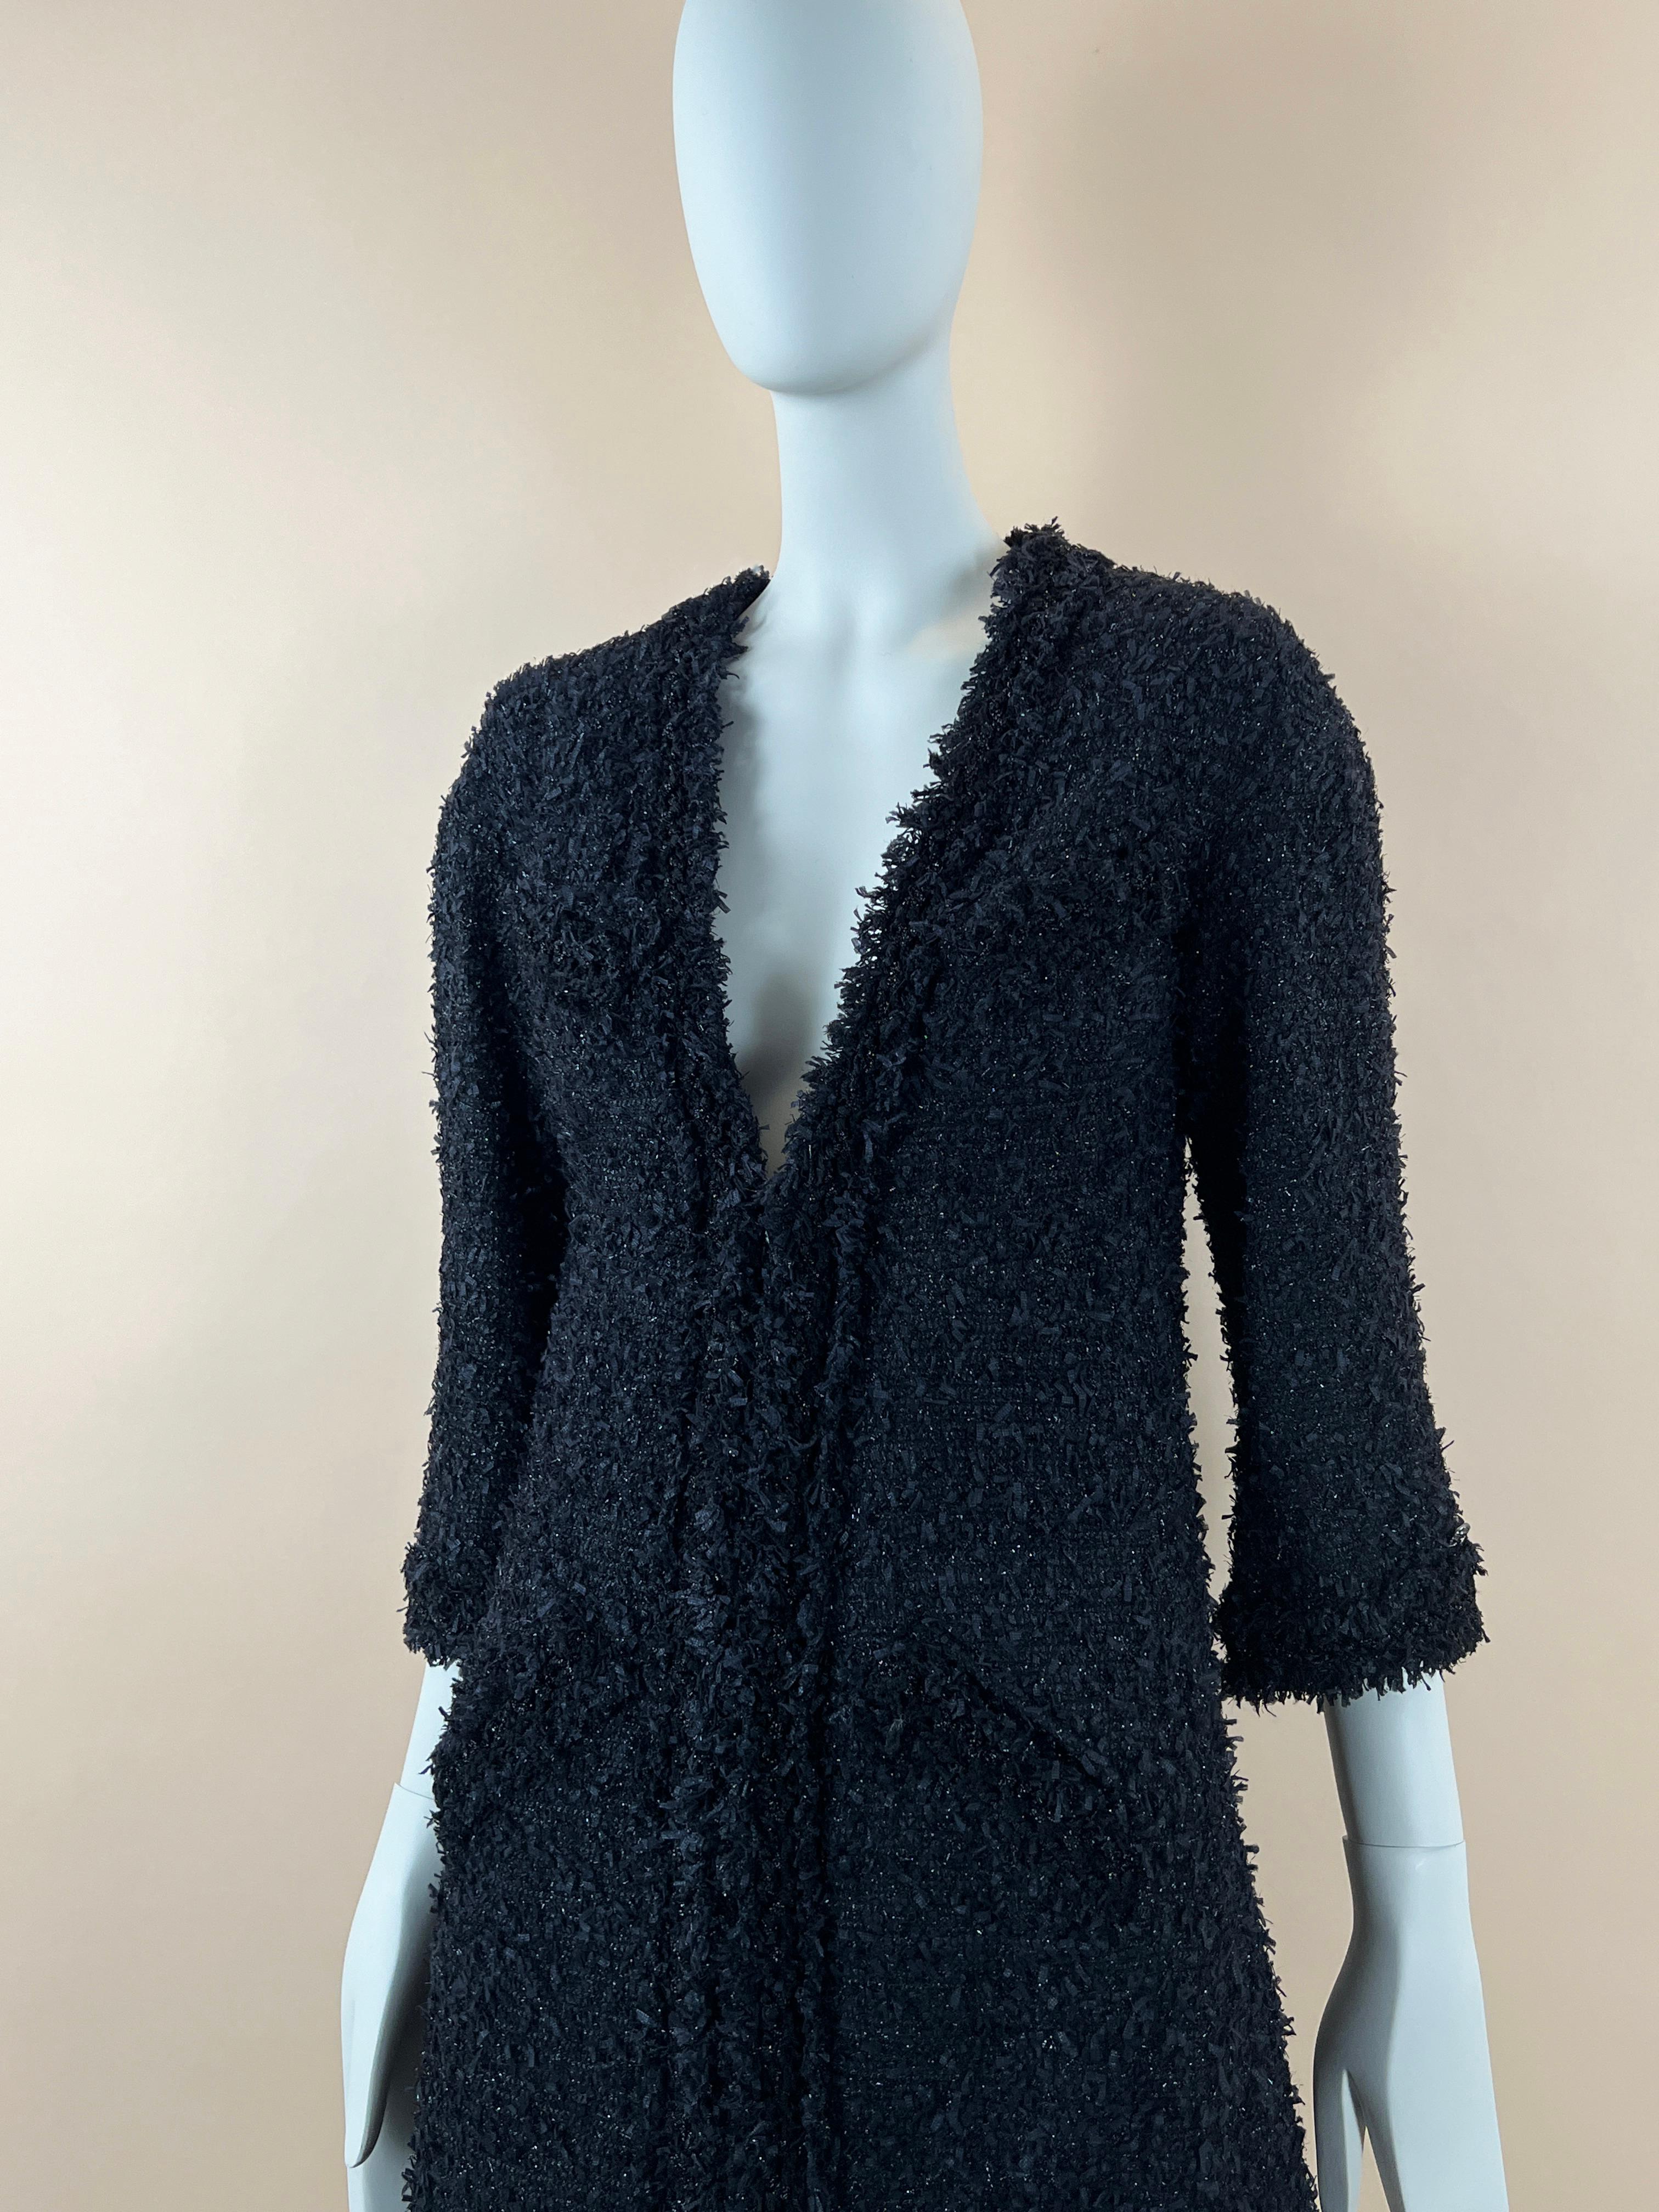 Fabulous Chanel black tweed jacket / coat made of precious tweed de Atelier Lesage.
From Paris / DUBAI 2015 Cruise Collection by Mr Karl Lagerfeld. Retail price over 8,800€
The jacket has intricate electric shimmer,
signature fringe edging
CC logo